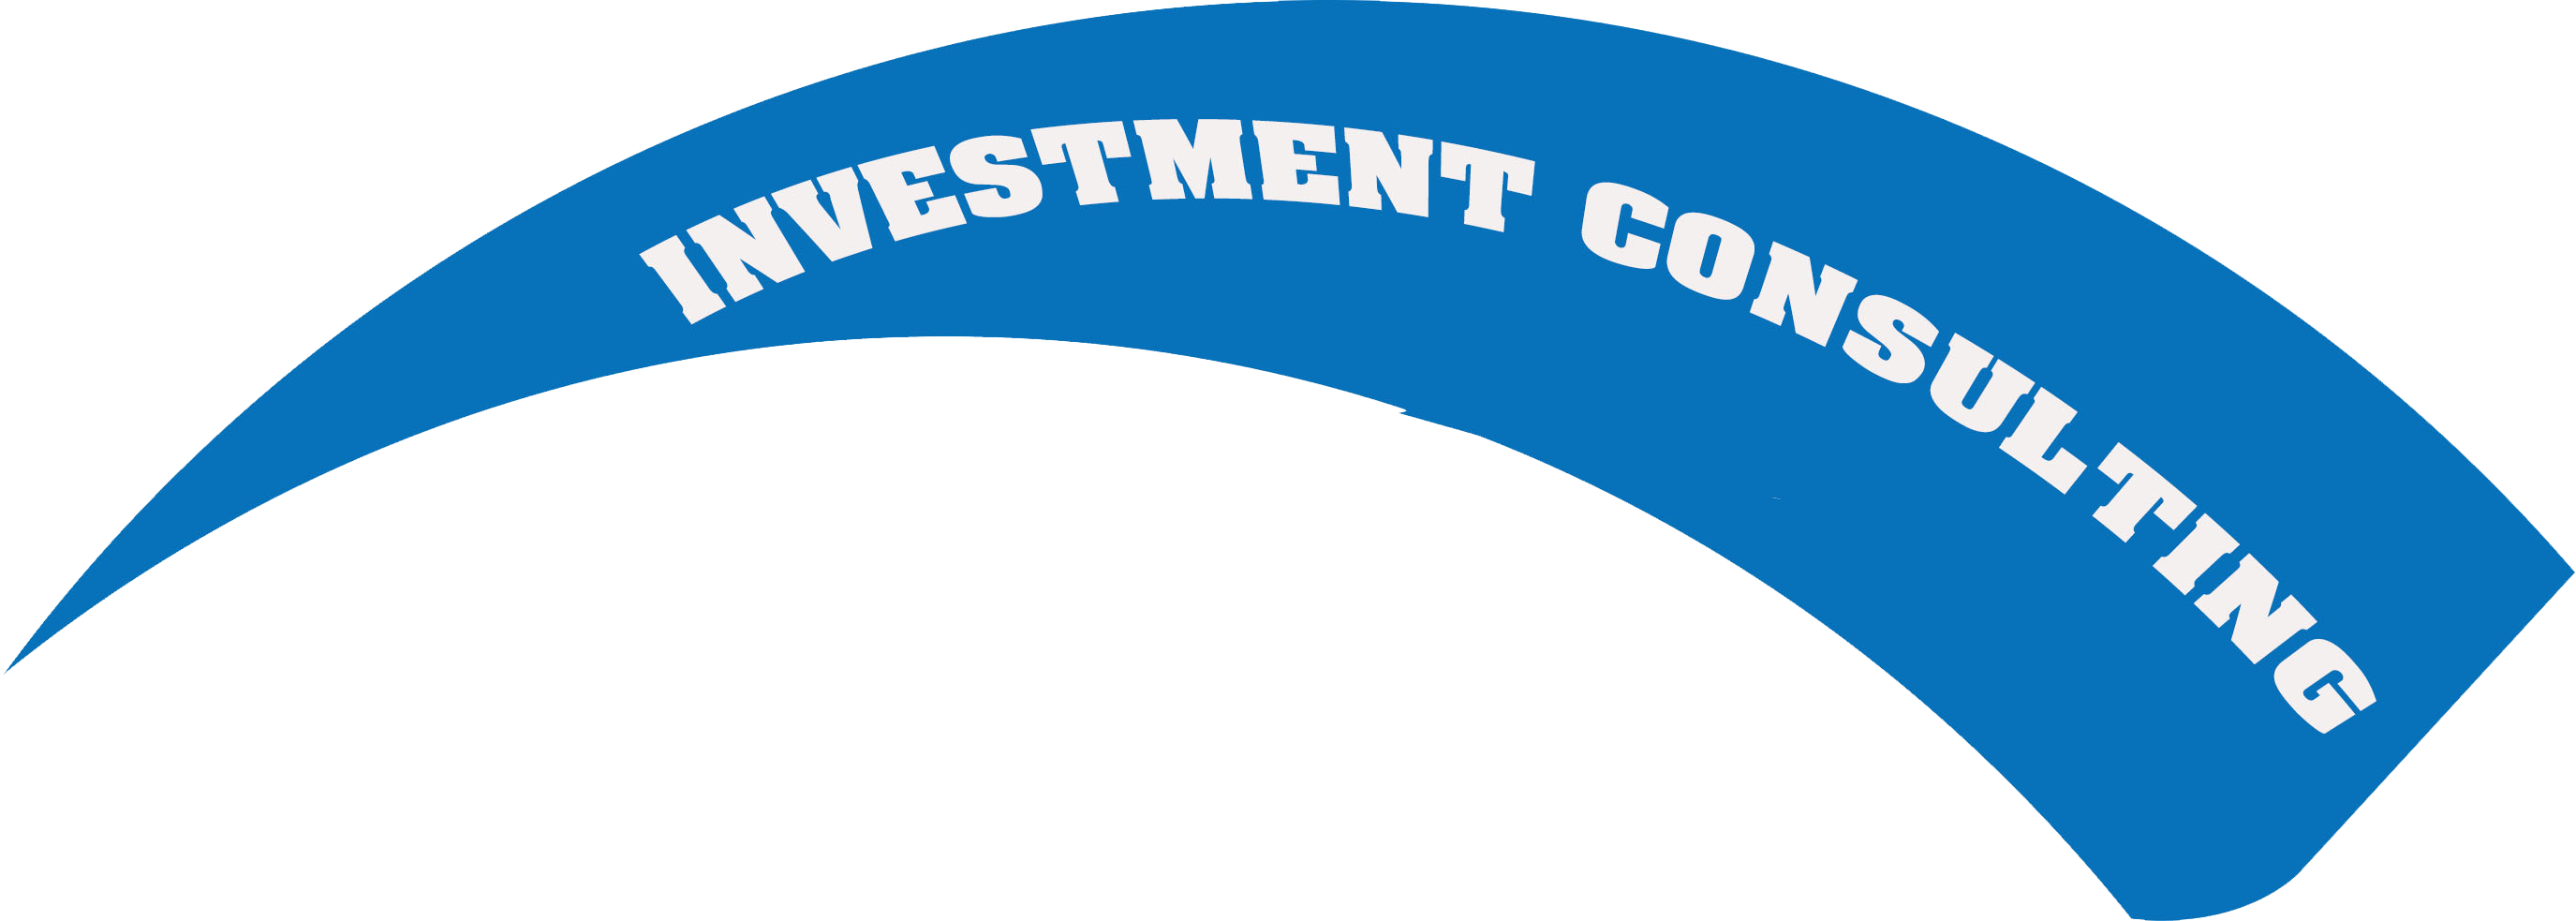 Investment consulting